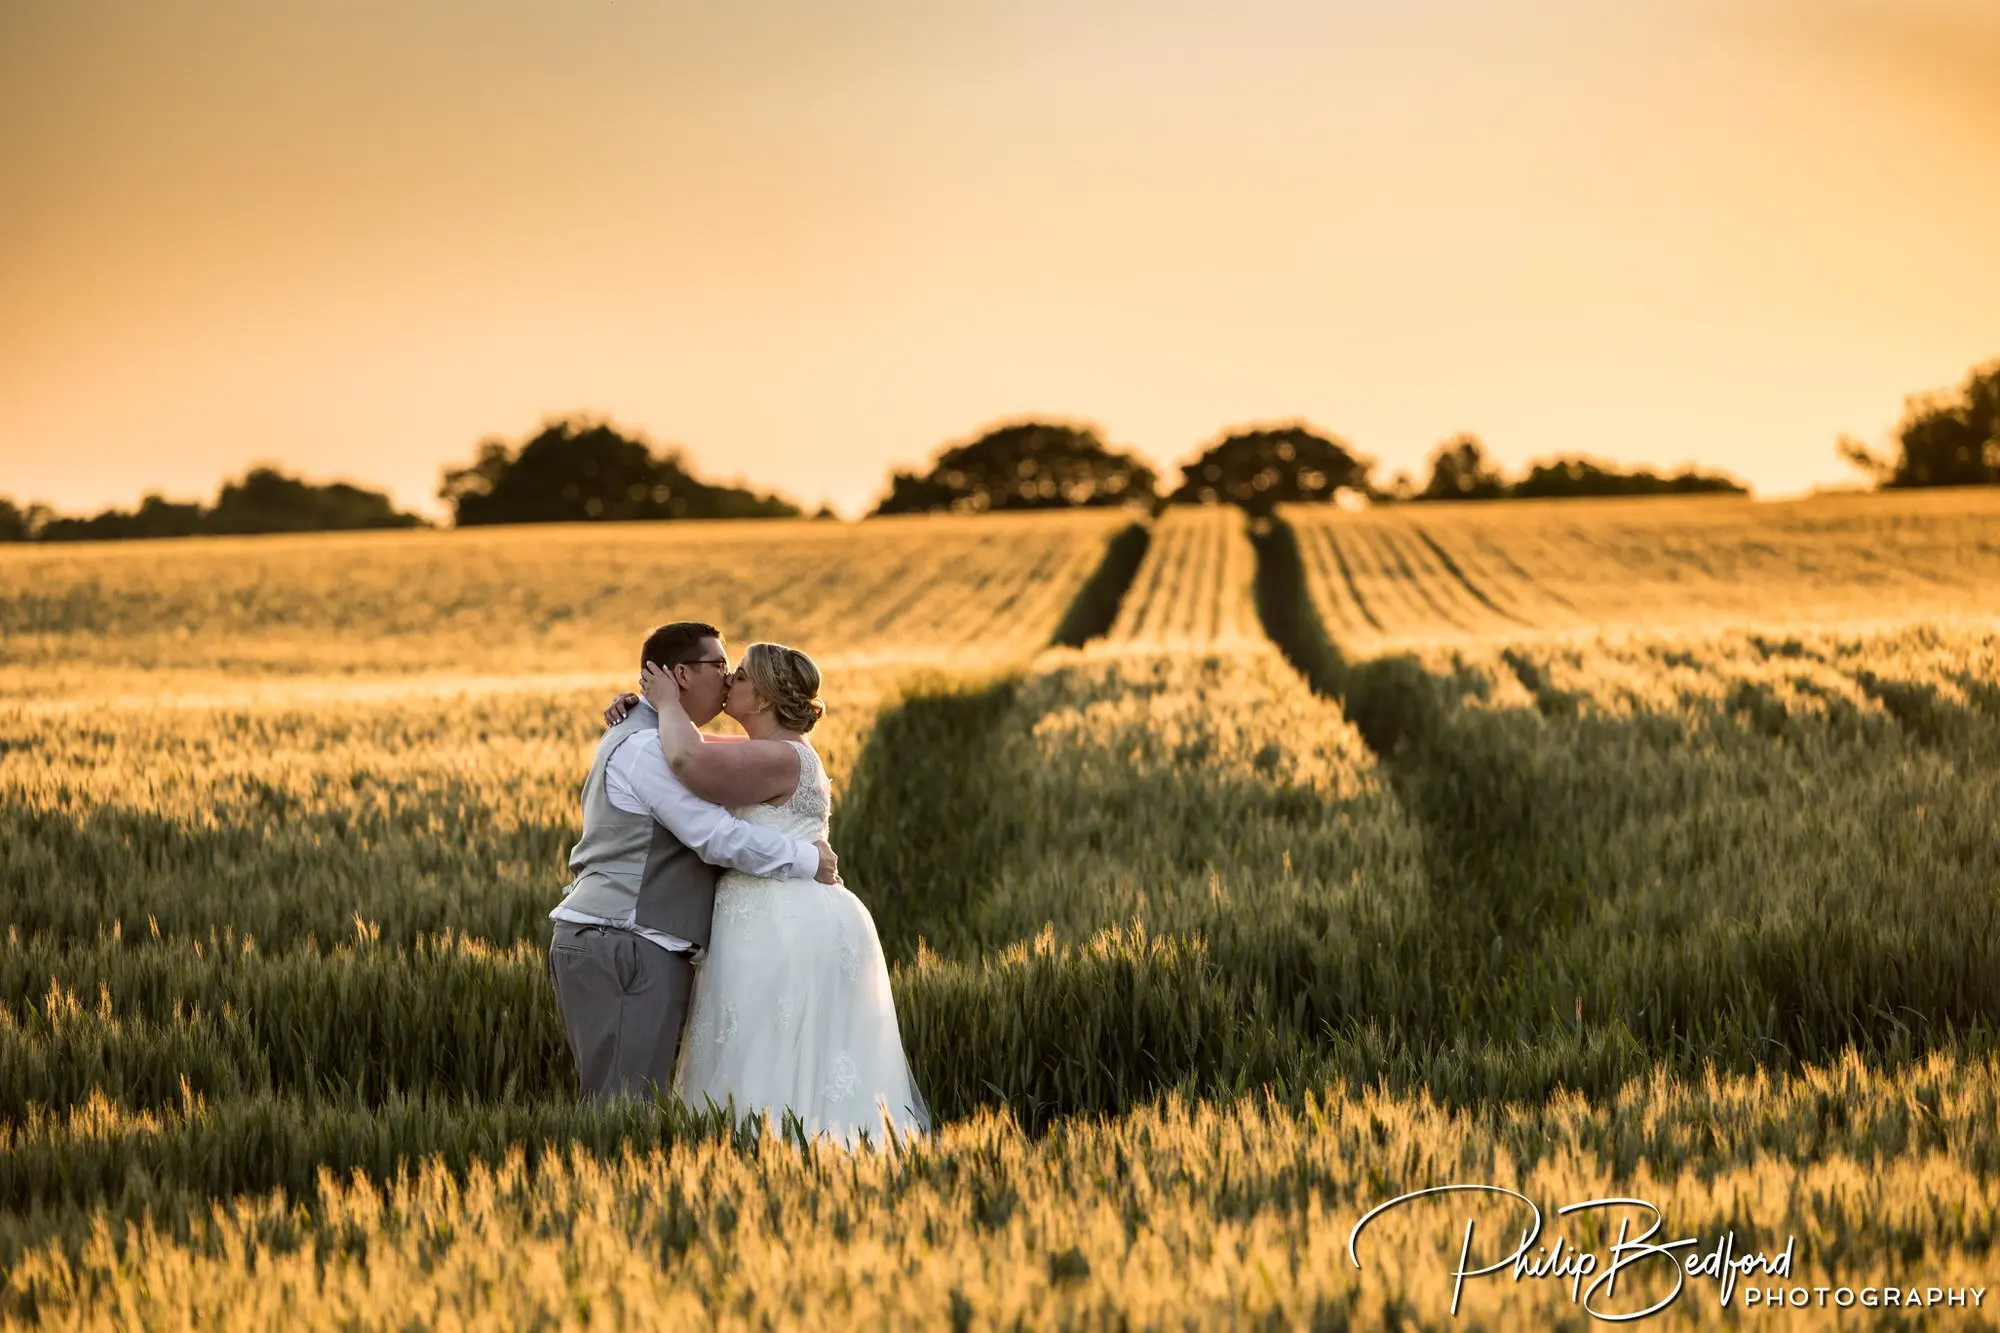 Bride and groom share a kiss in a Wheatfield at golden hour - Fitzleroi Barn Summer Wedding